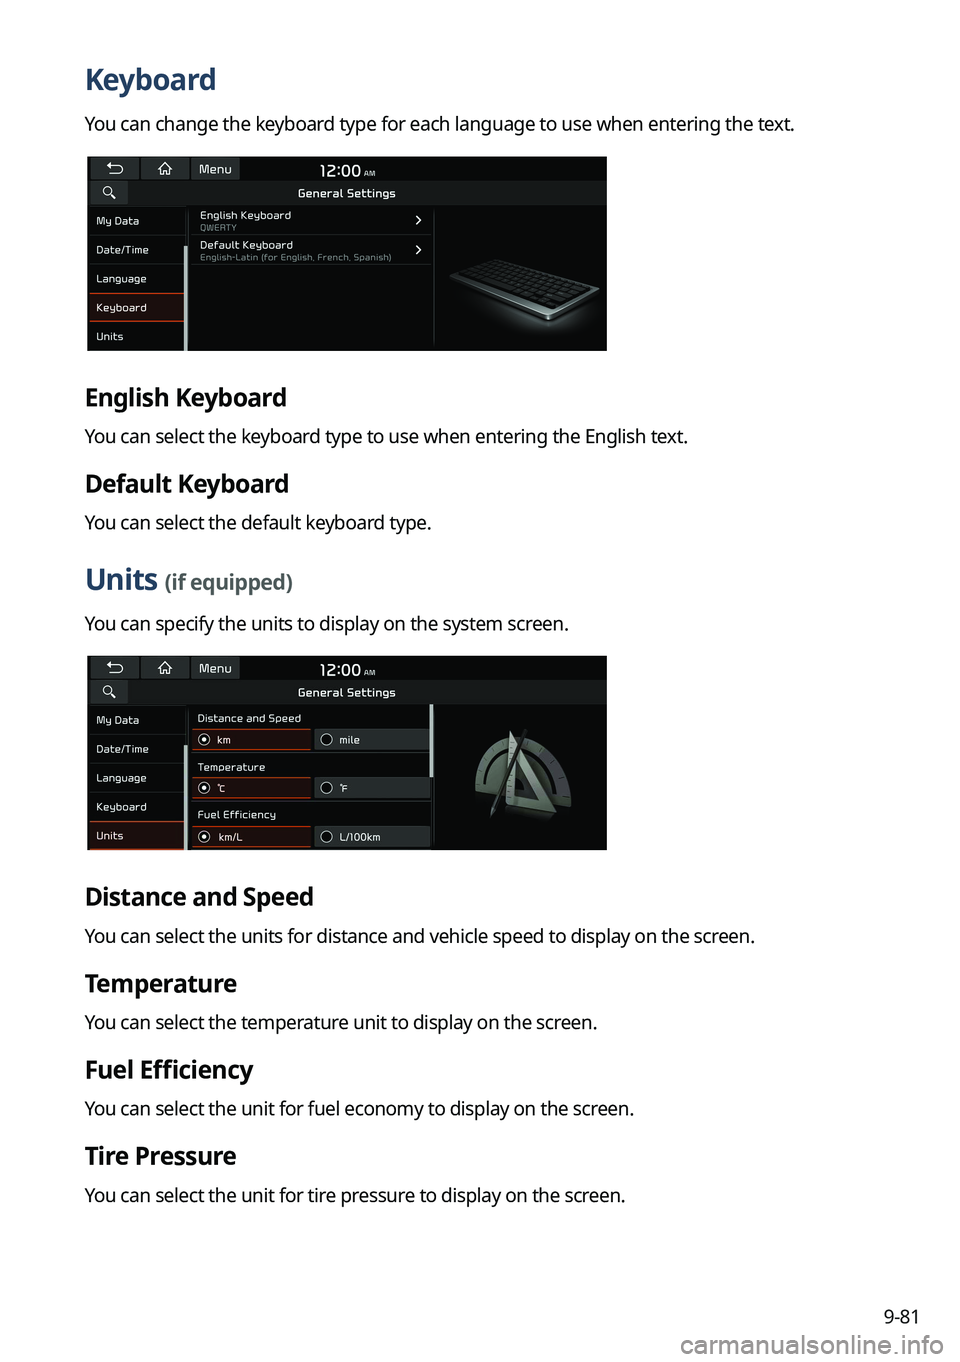 KIA NIRO PHEV 2022  Navigation System Quick Reference Guide 9-81
Keyboard
You can change the keyboard type for each language to use when entering the text.
English Keyboard
You can select the keyboard type to use when entering the English text.
Default Keyboar